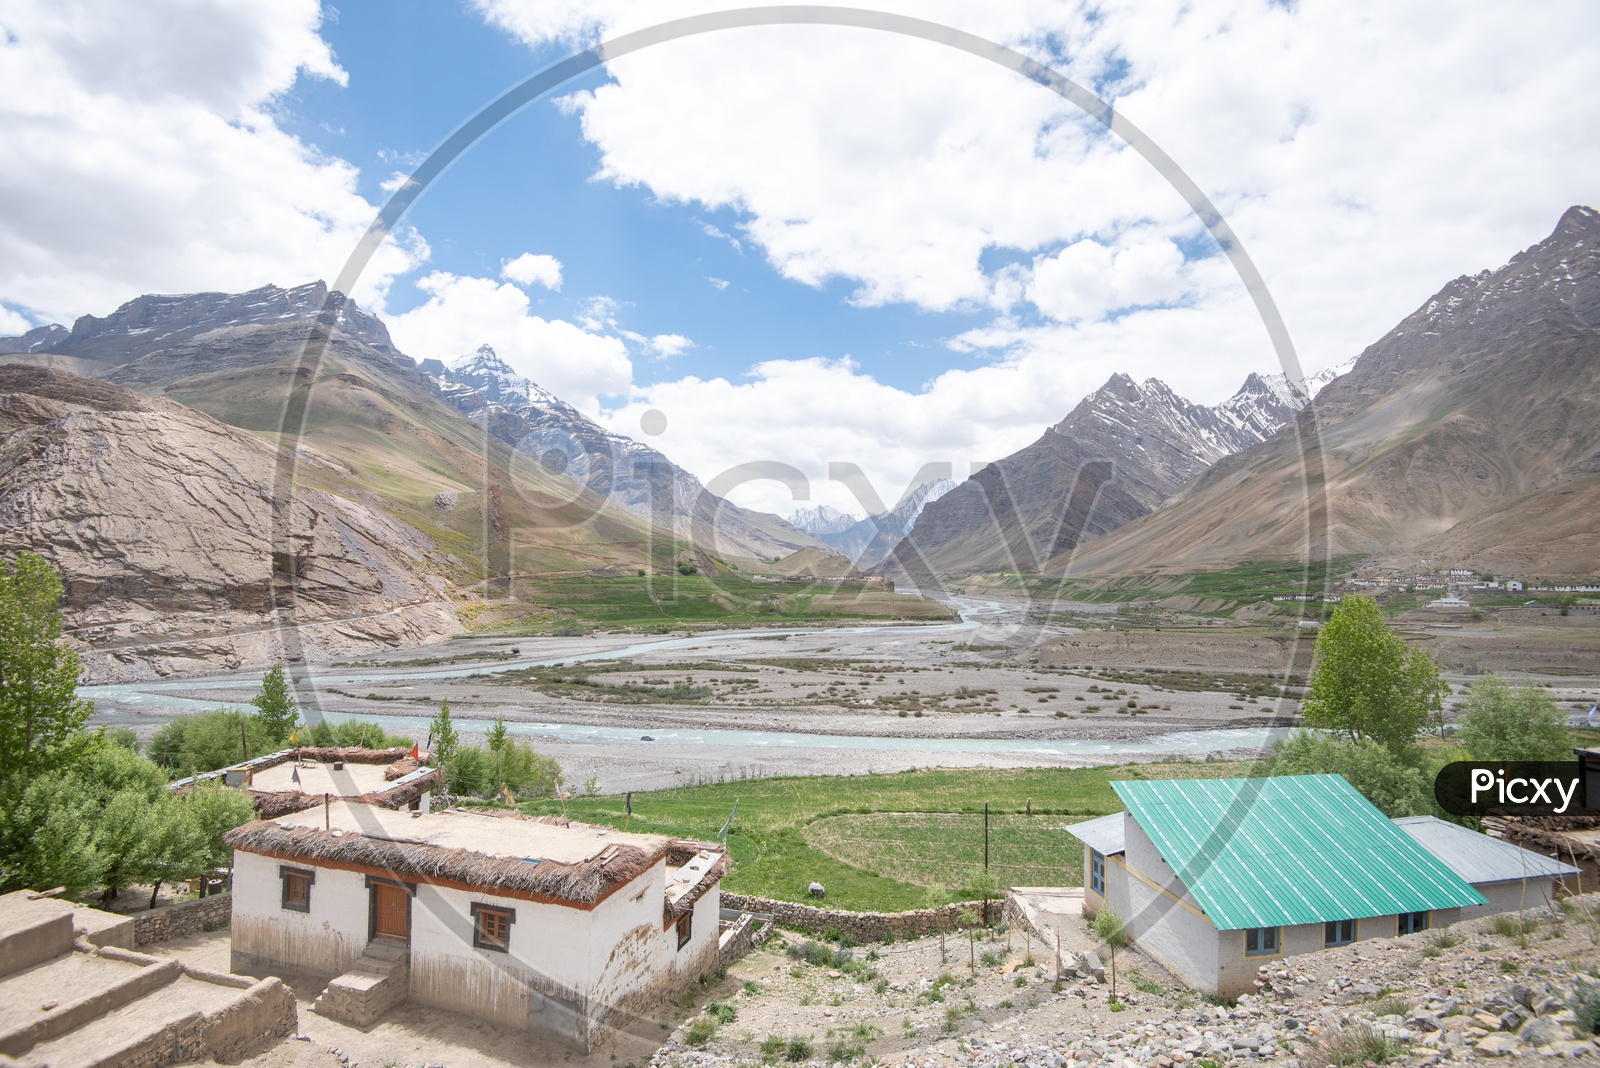 Houses and farm lands beside the Spiti river in Spiti Valley